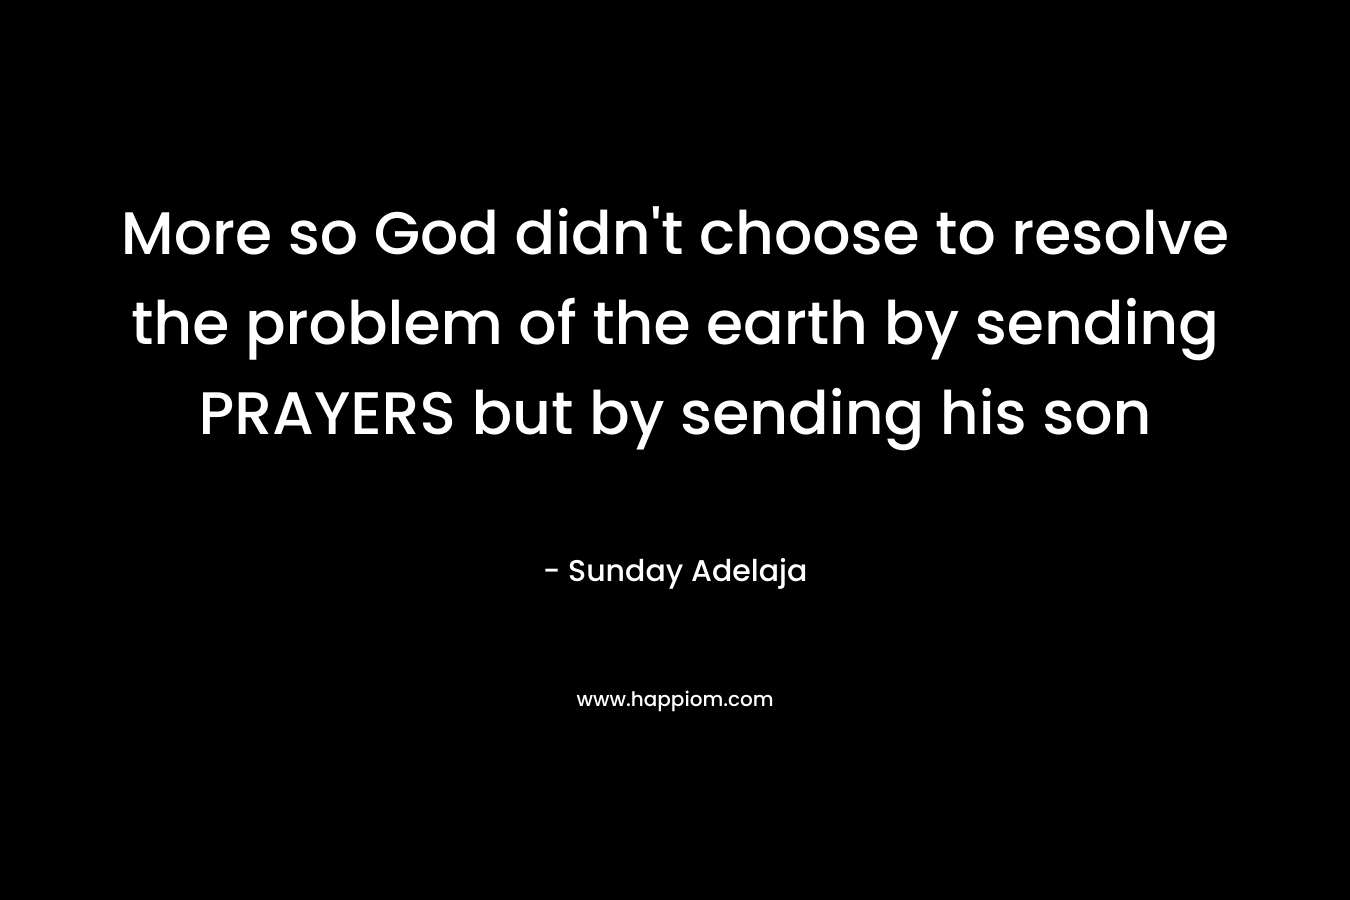 More so God didn't choose to resolve the problem of the earth by sending PRAYERS but by sending his son